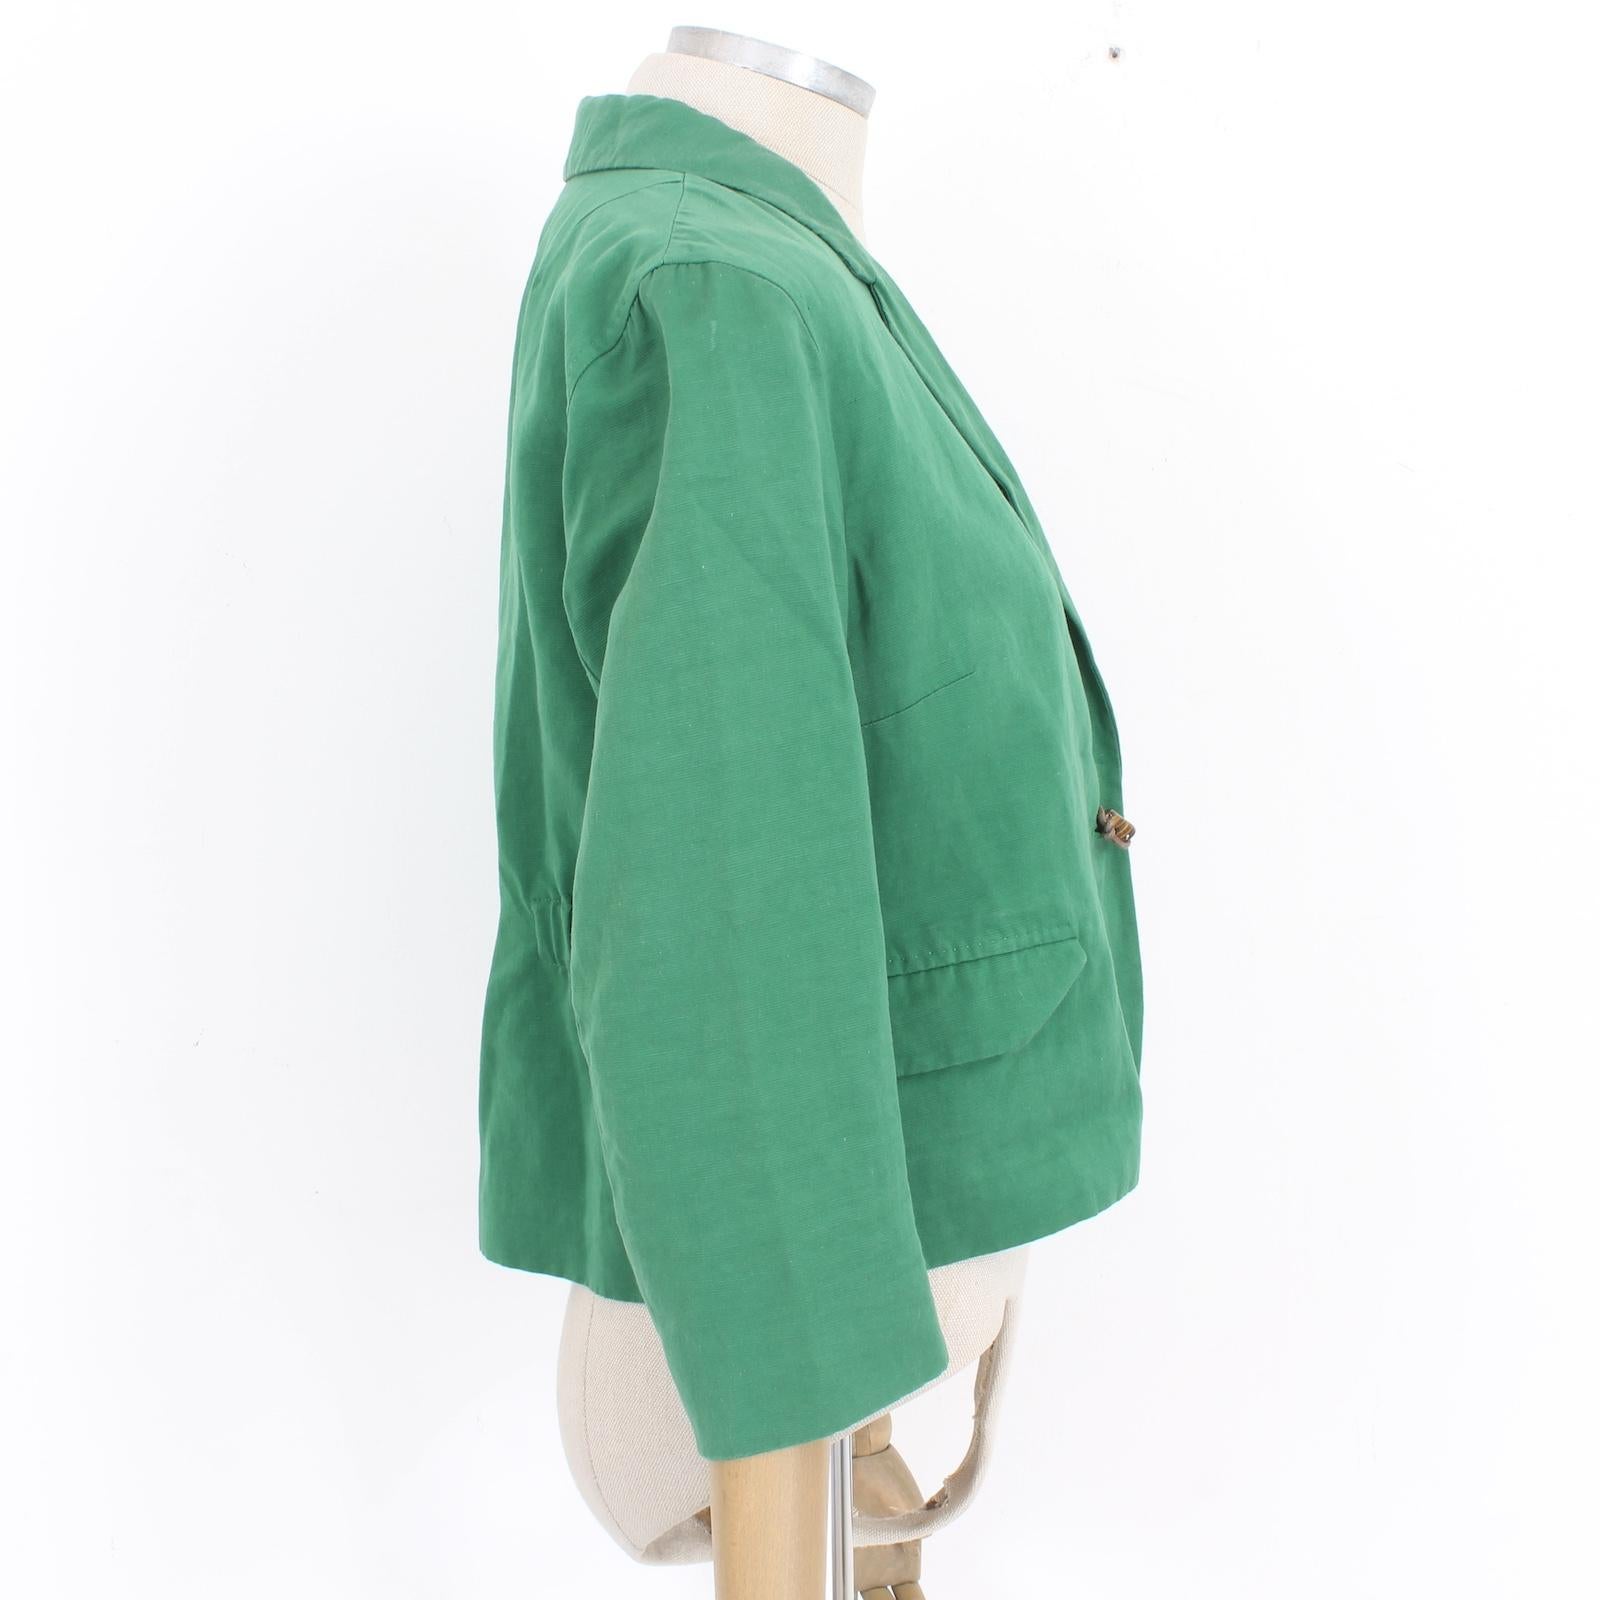 This vintage Dries Van Noten blazer is a unique and stylish addition to any wardrobe. Made with a blend of linen and cotton, it features a striking frog closure and brown and bronze beaded details on the side. The elastic waistband and 3/4 length